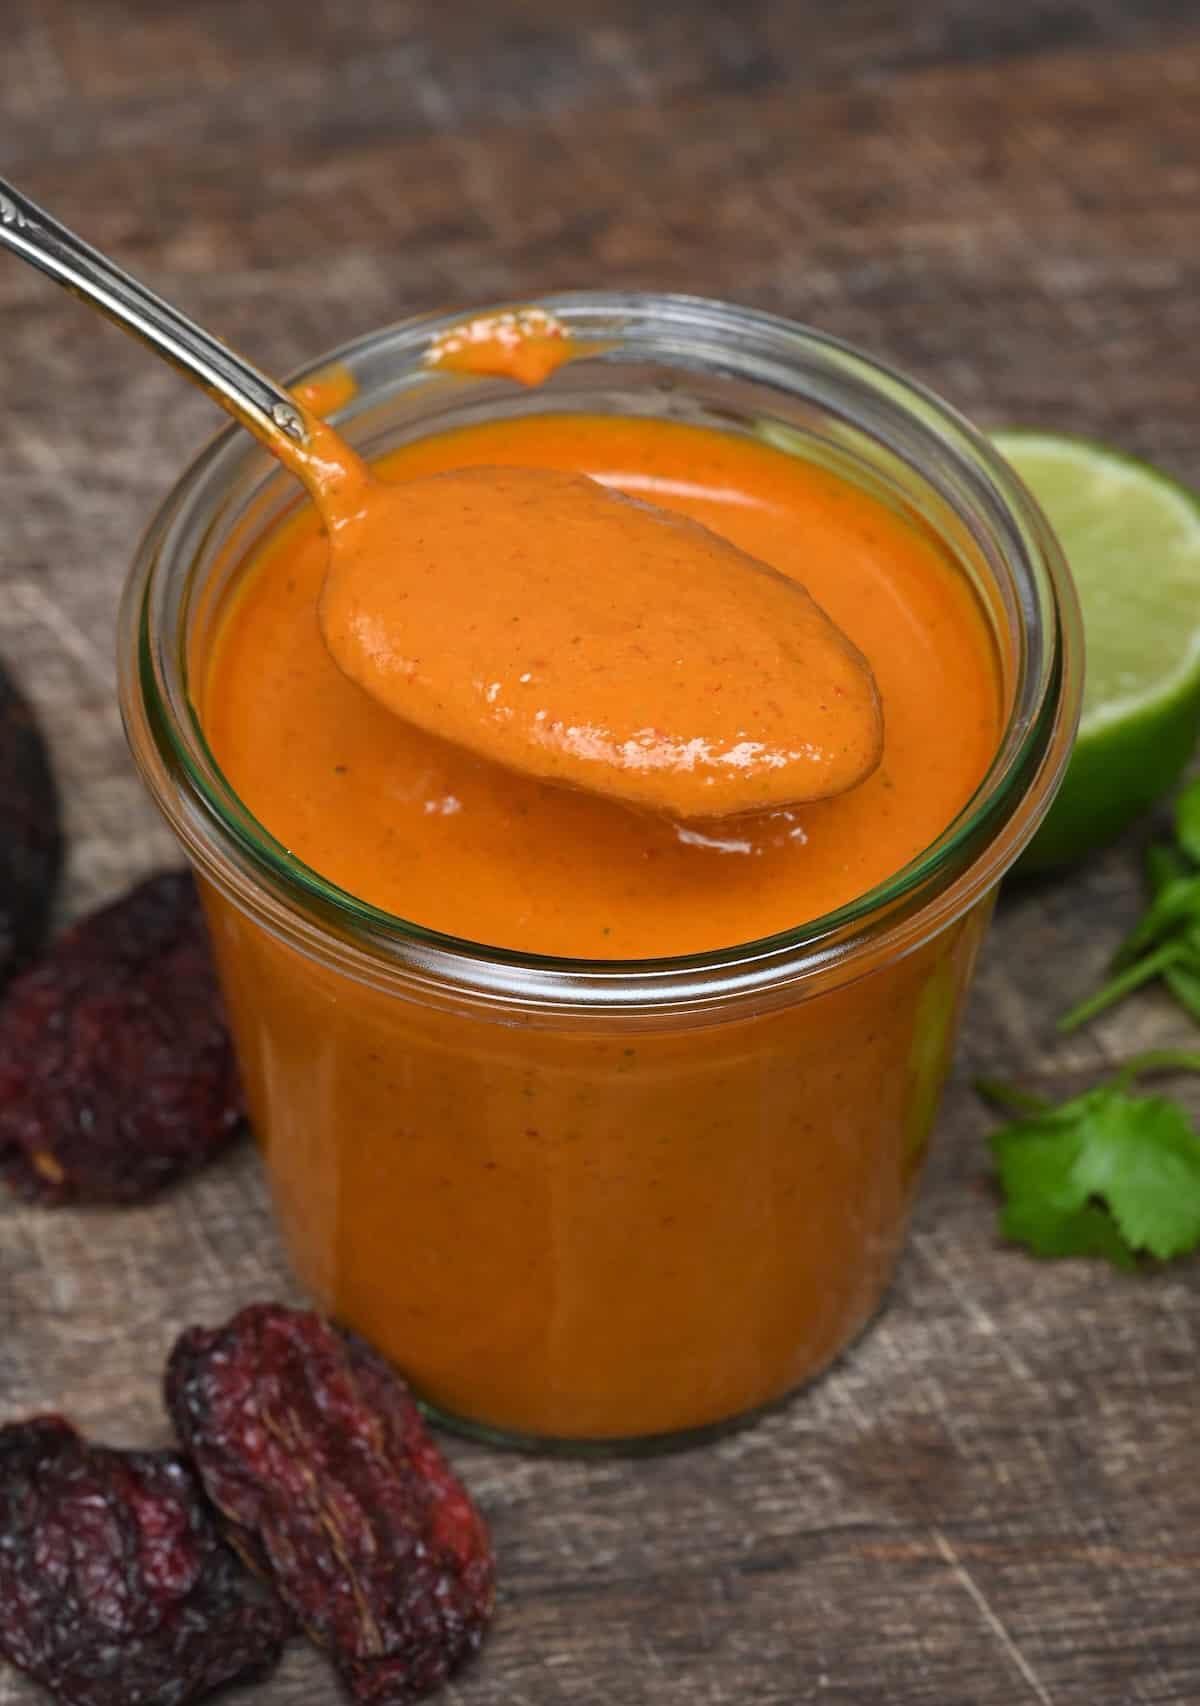 Simple Homemade Chili Sauce (Red Chilli Sauce) - Alphafoodie